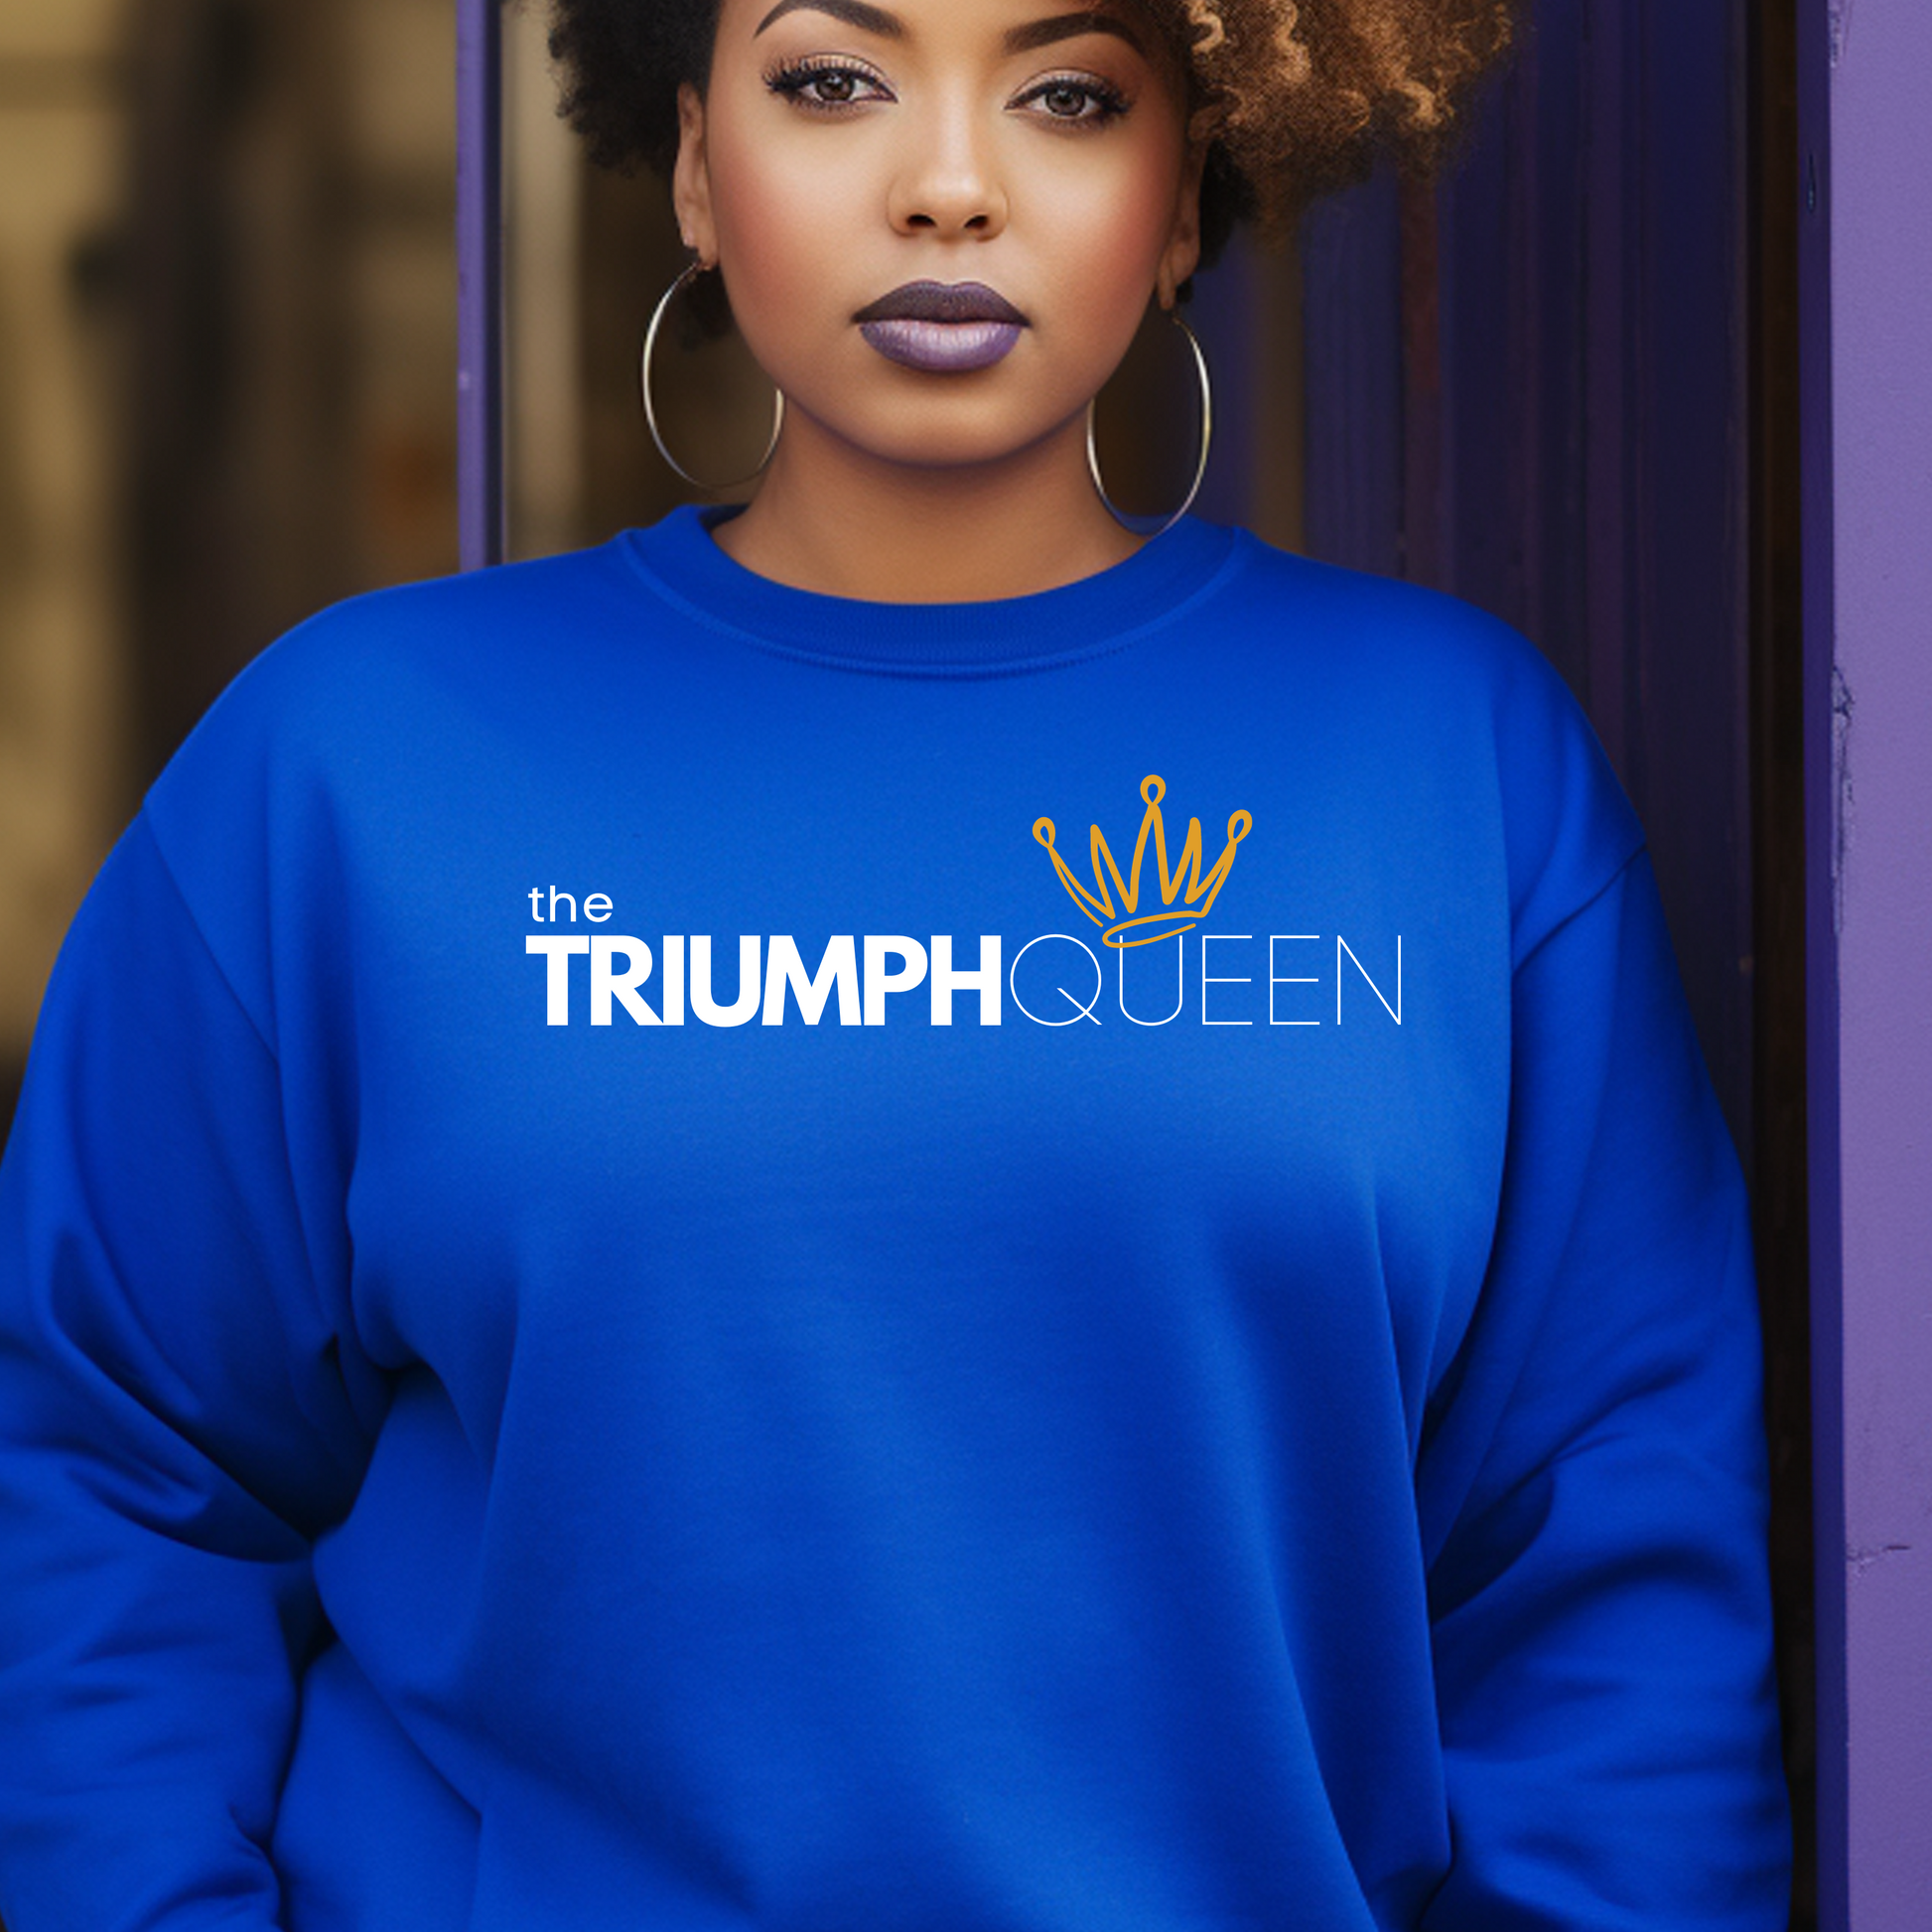 Shop for our Triumph Queen royal blue unisex sweatshirt. This cozy faith clothing is for believers who know they are more than conquerors. This shirt is soft and comfortable for everyday wear.